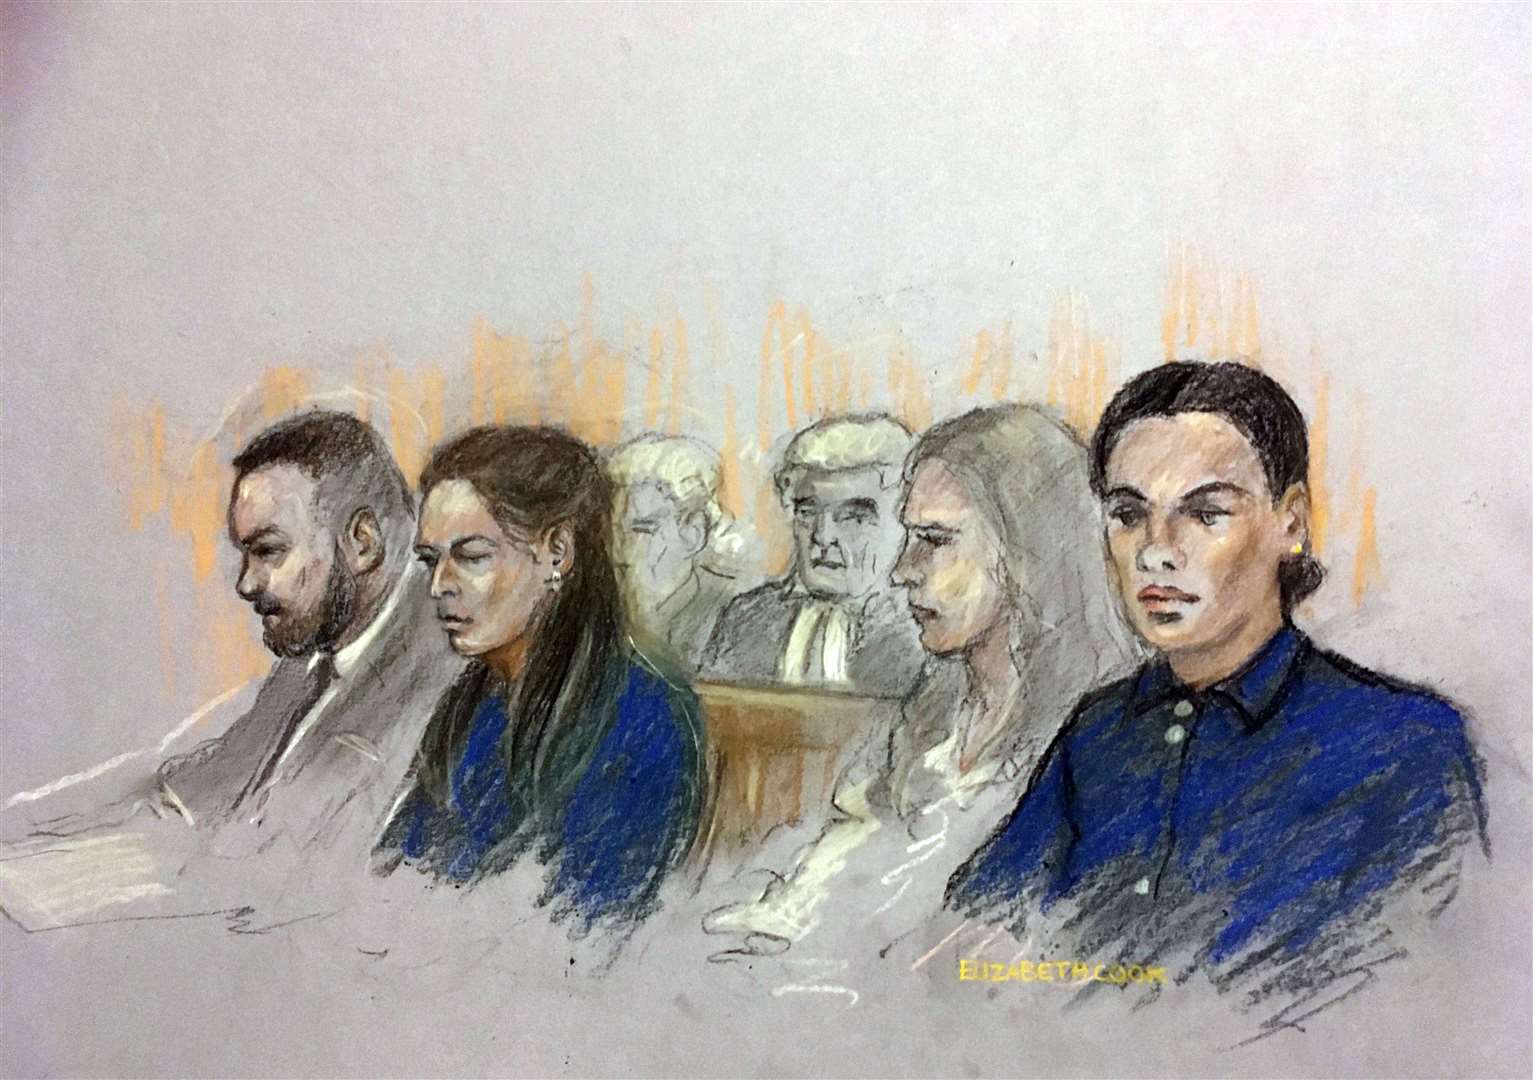 Court artist sketch by Elizabeth Cook of Coleen and Wayne Rooney (left) and Rebekah Vardy (right) sitting near to each other in the front row at court prior to Vardy giving evidence (Elizabeth Cook/PA)